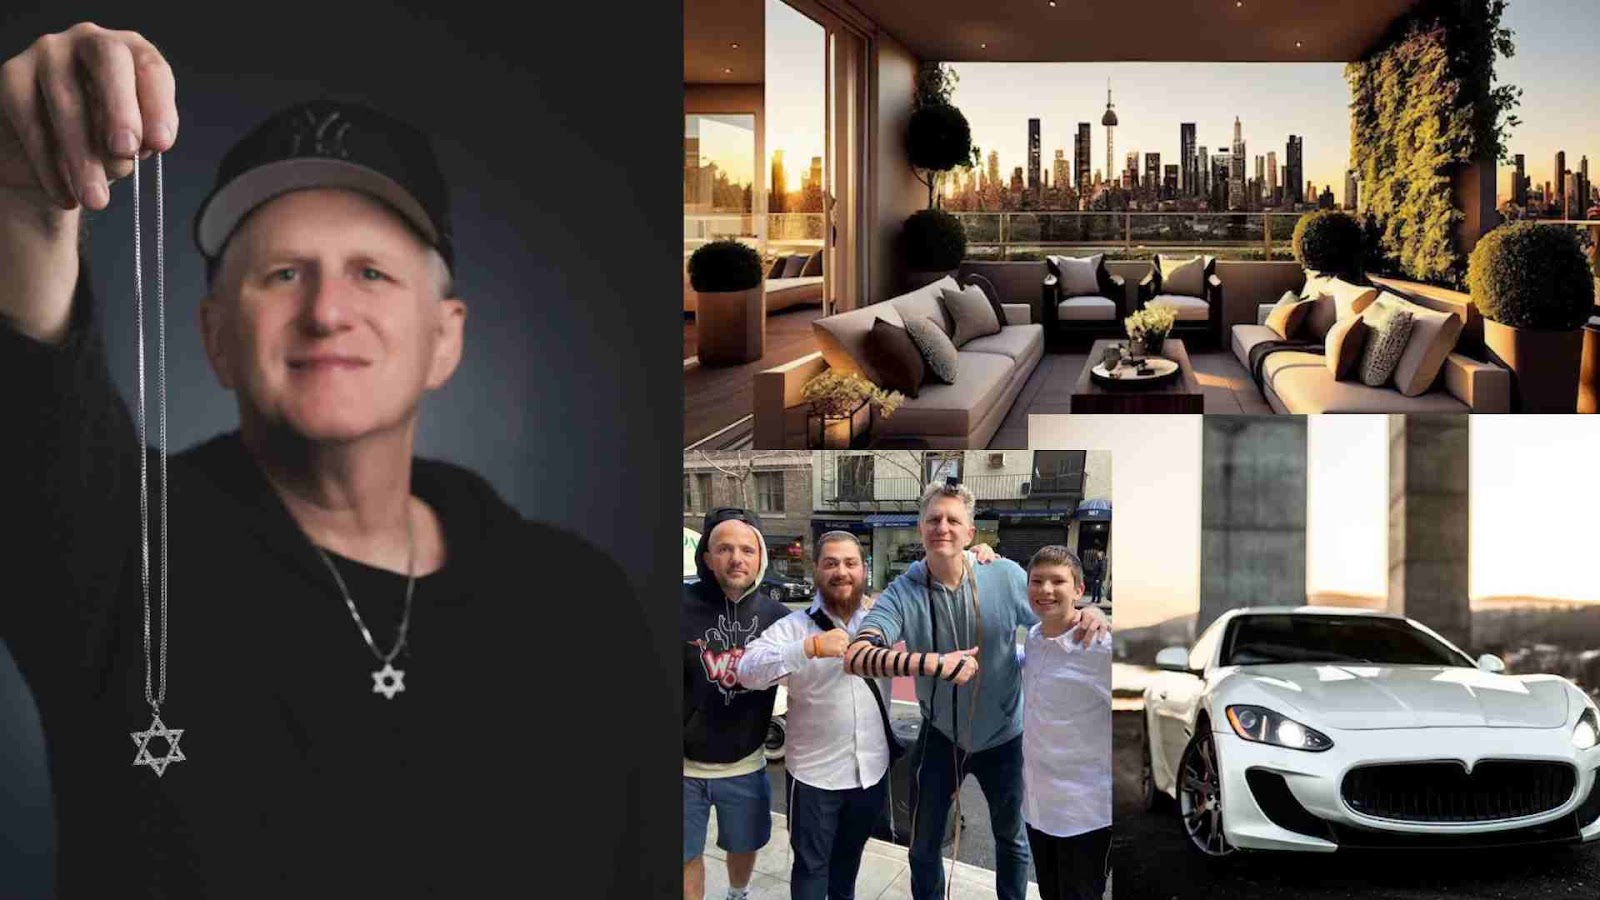 Where Did Michael Rapaport Spend His Earnings?